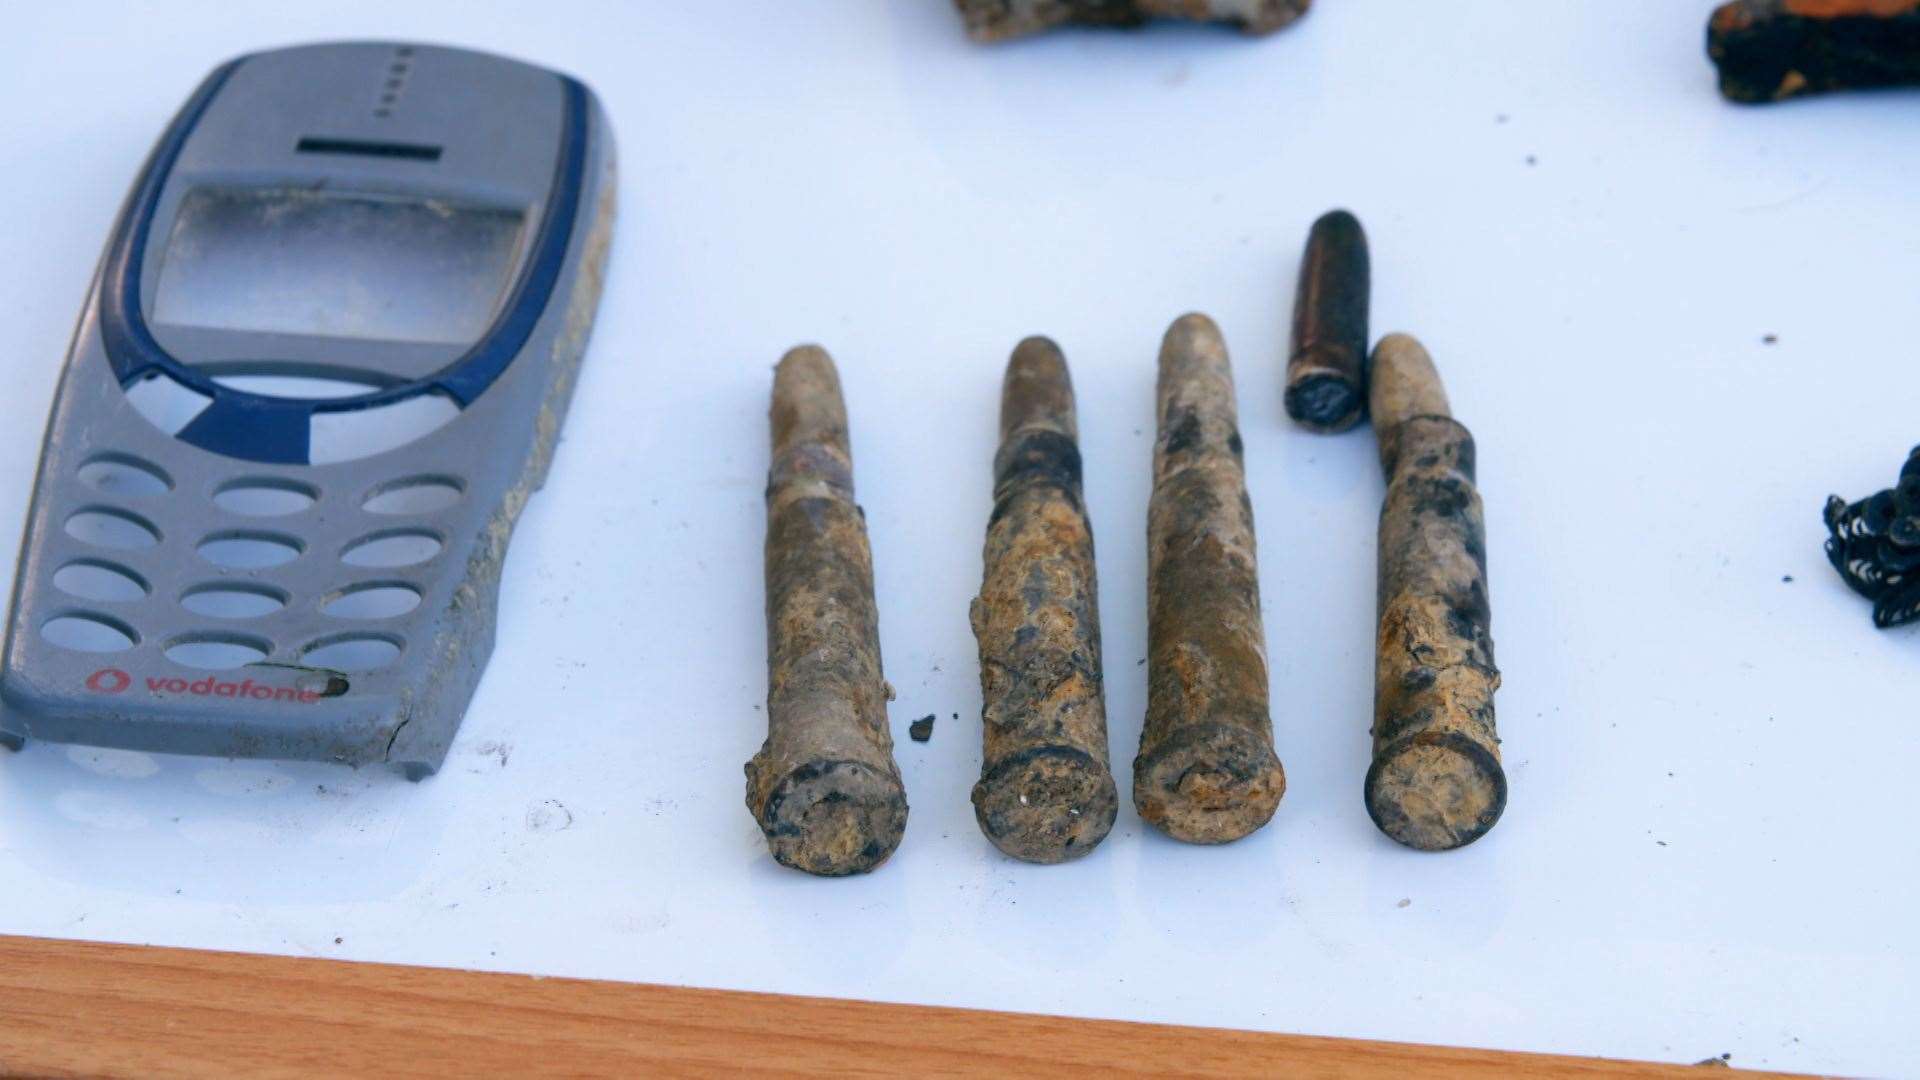 Bullets were found on the riverbed... along with a Nokia phone